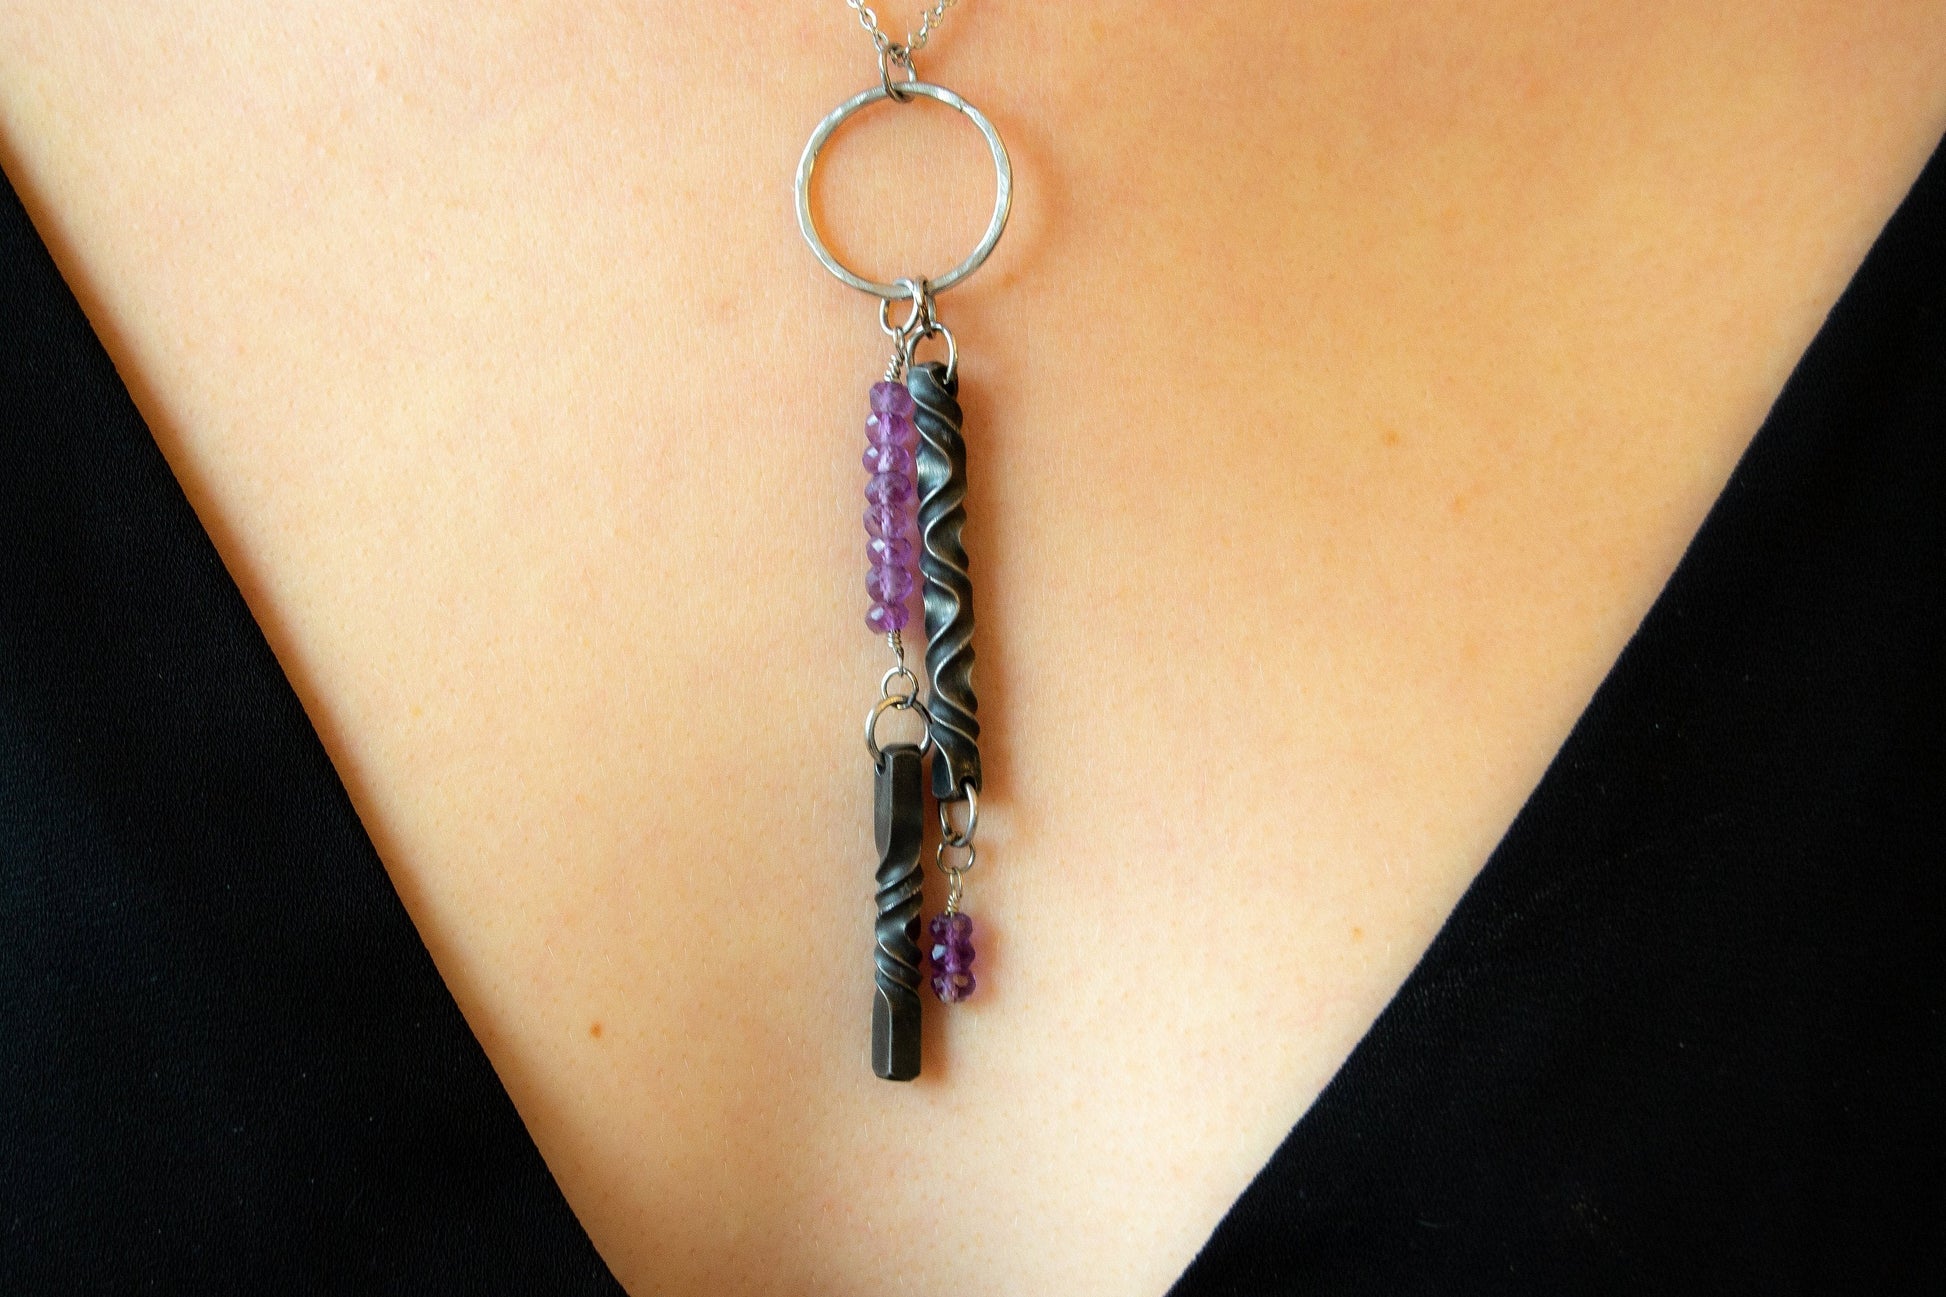 Iron and amethyst necklace - 6th anniversary gift for her - iron anniversary - hand forged by blacksmith